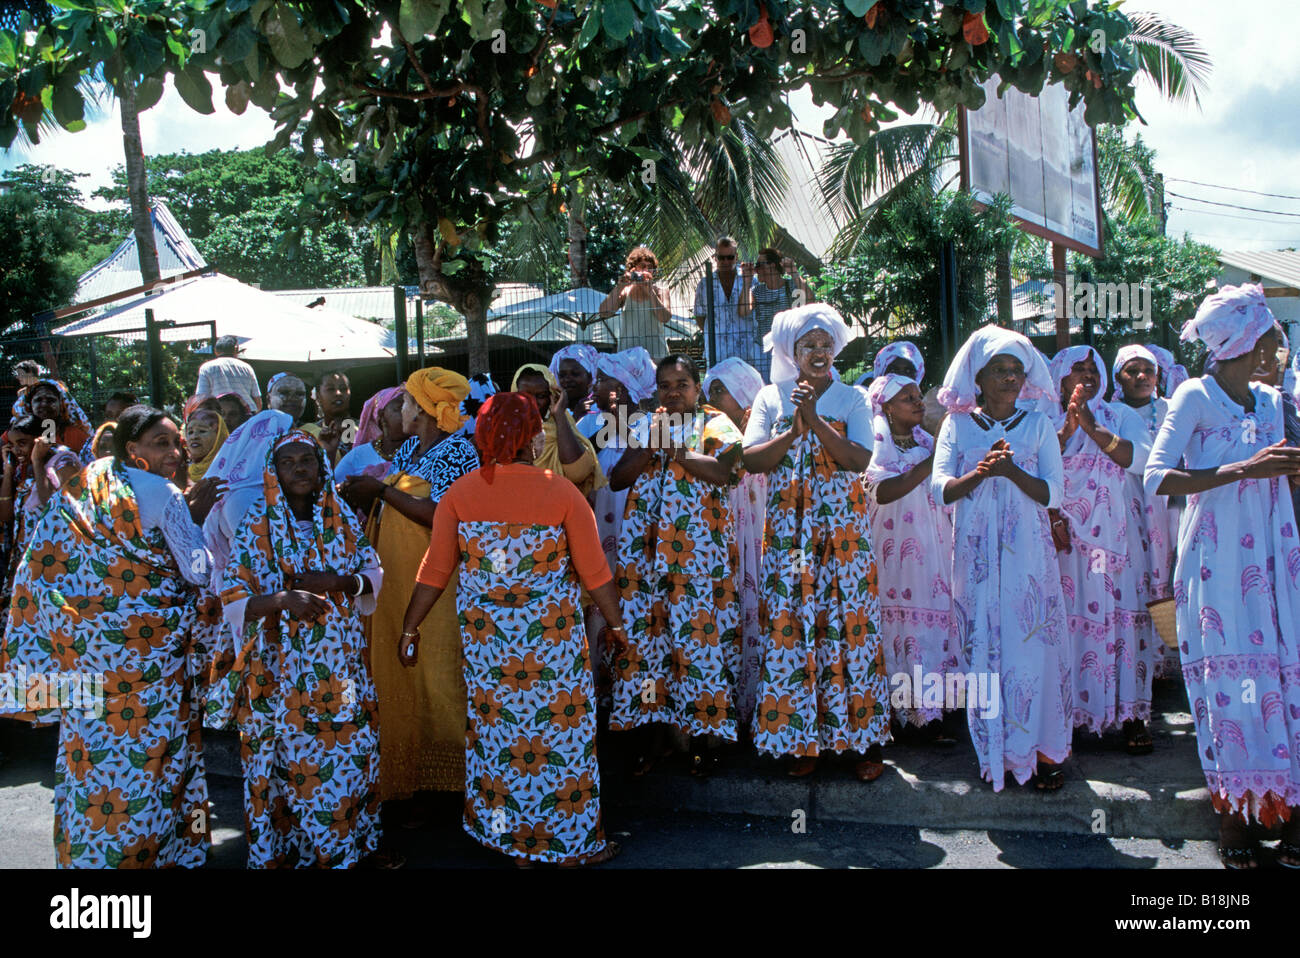 Villagers on Grande Terre island, Mamoudzou, Mayotte islands, Indian Ocean celebrating their return from the Hajj Mecca Stock Photo